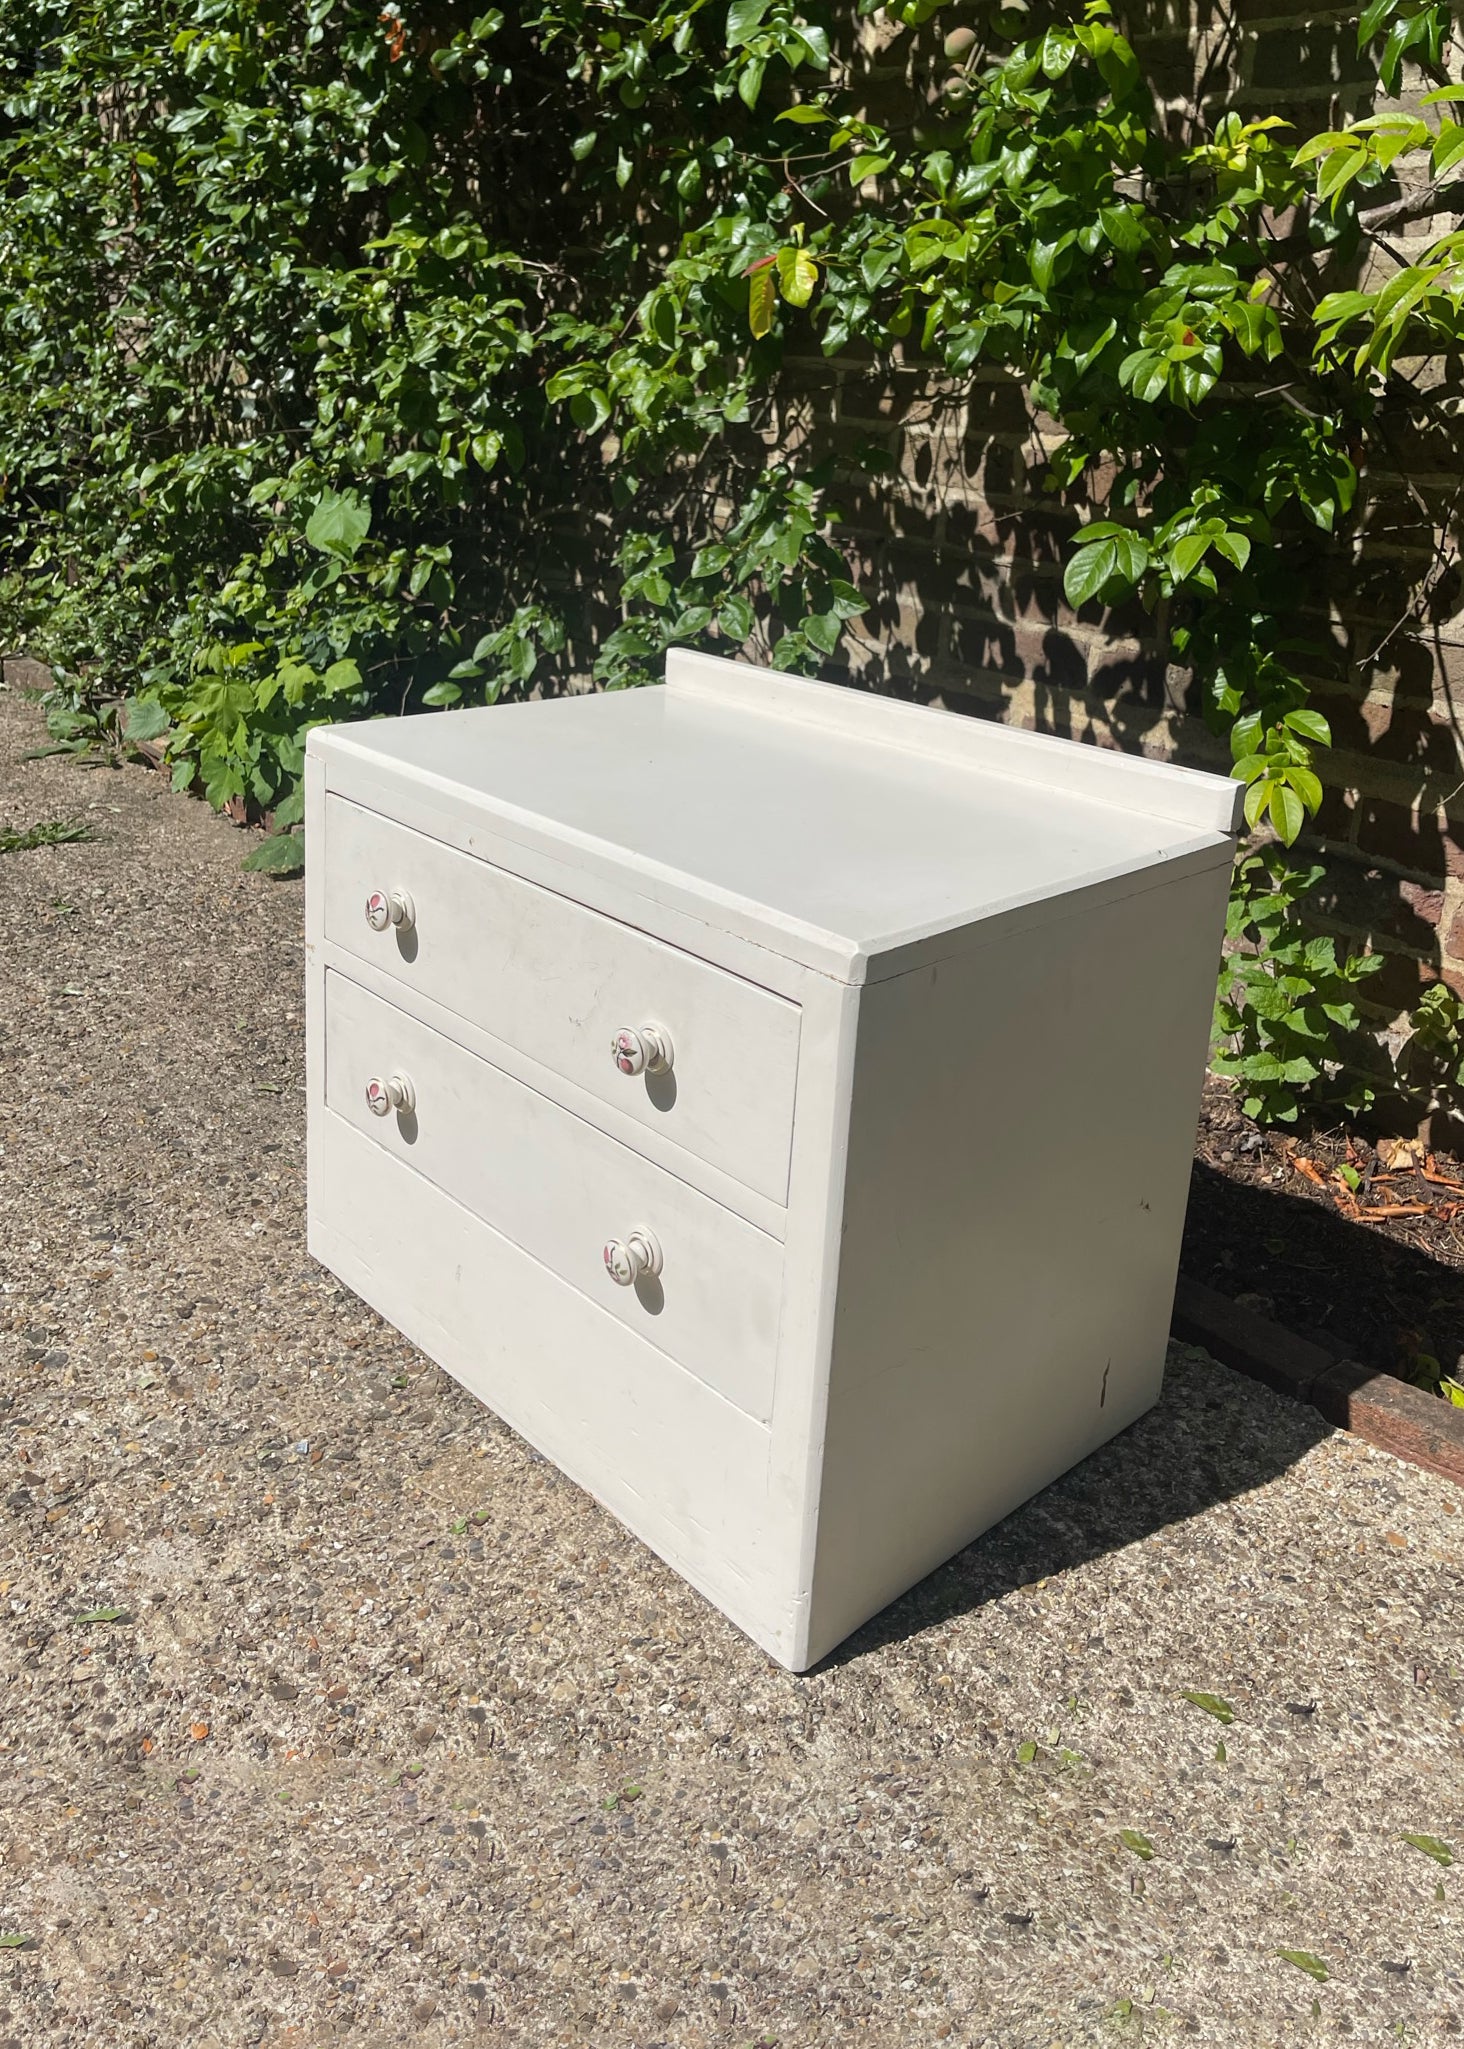 White Painted Chest of Drawers